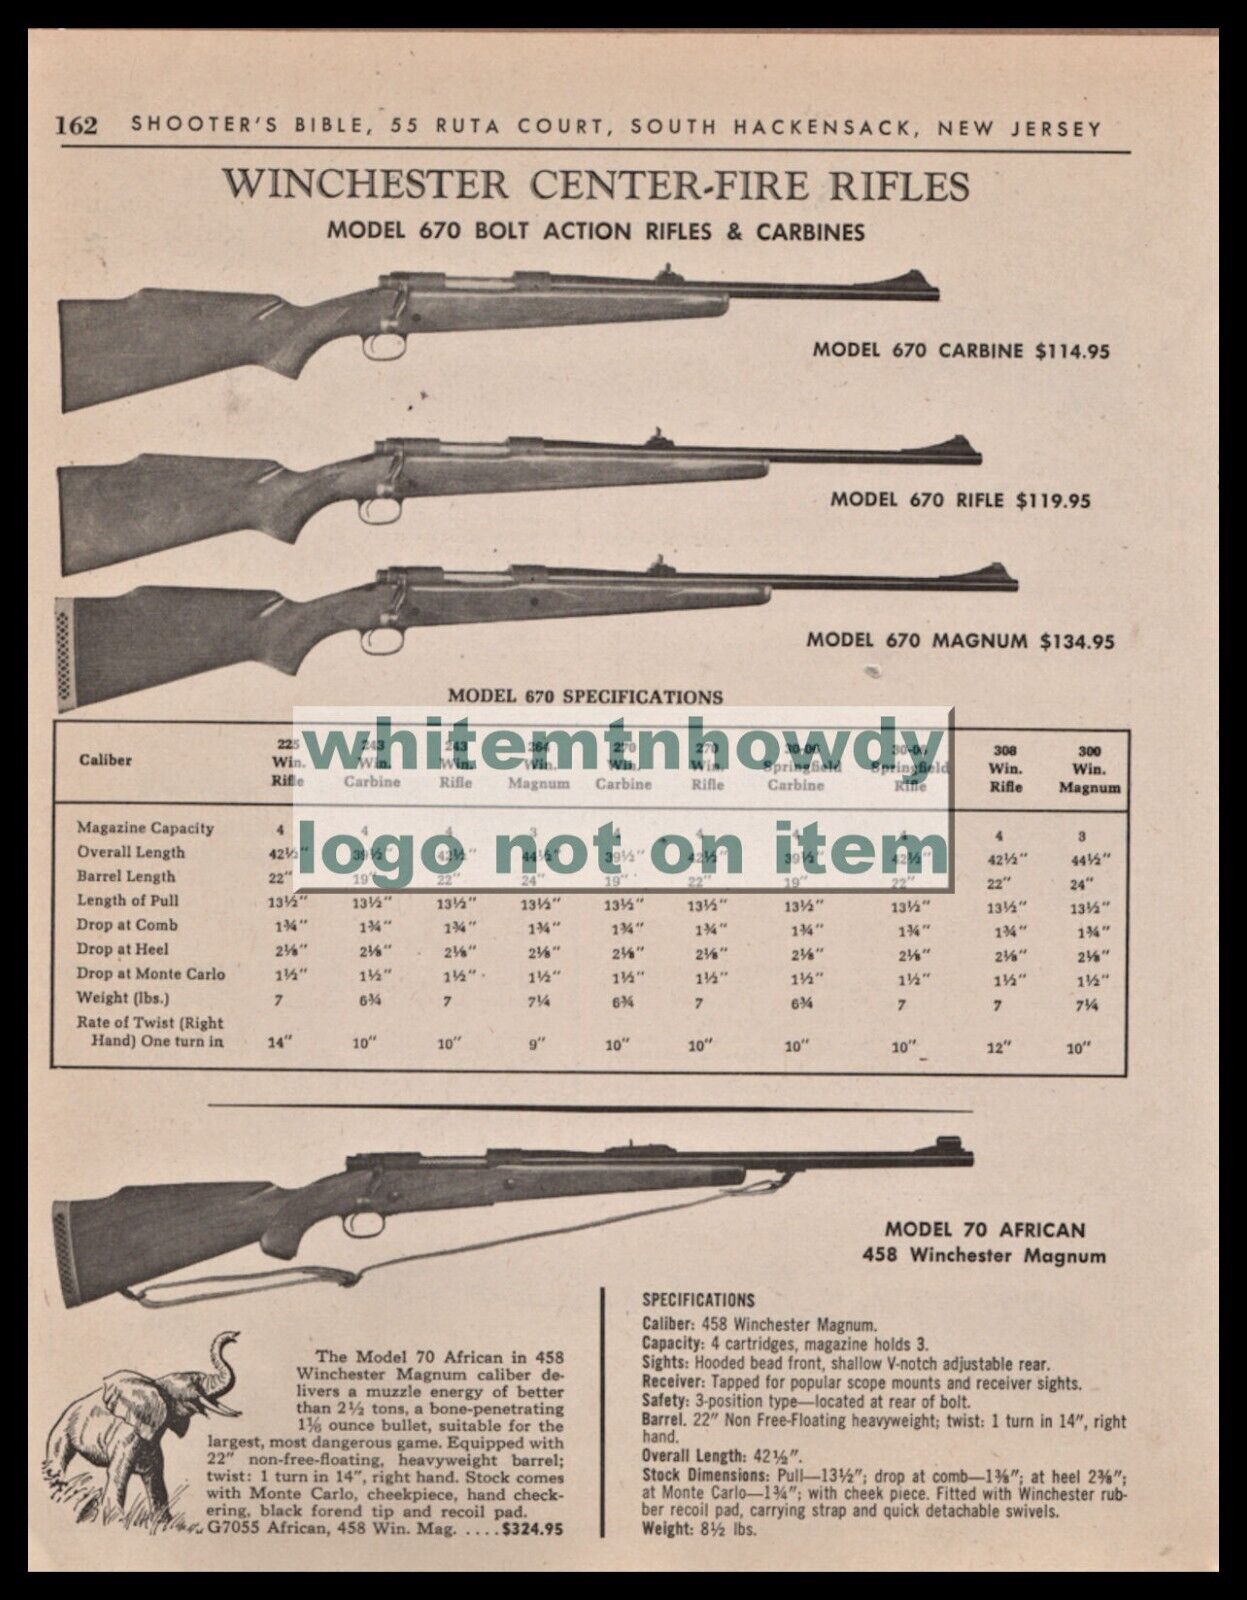 1967 WINCHESTER 670 Carbine Rifle Magnum and 70 African Rifle Original PRINT AD